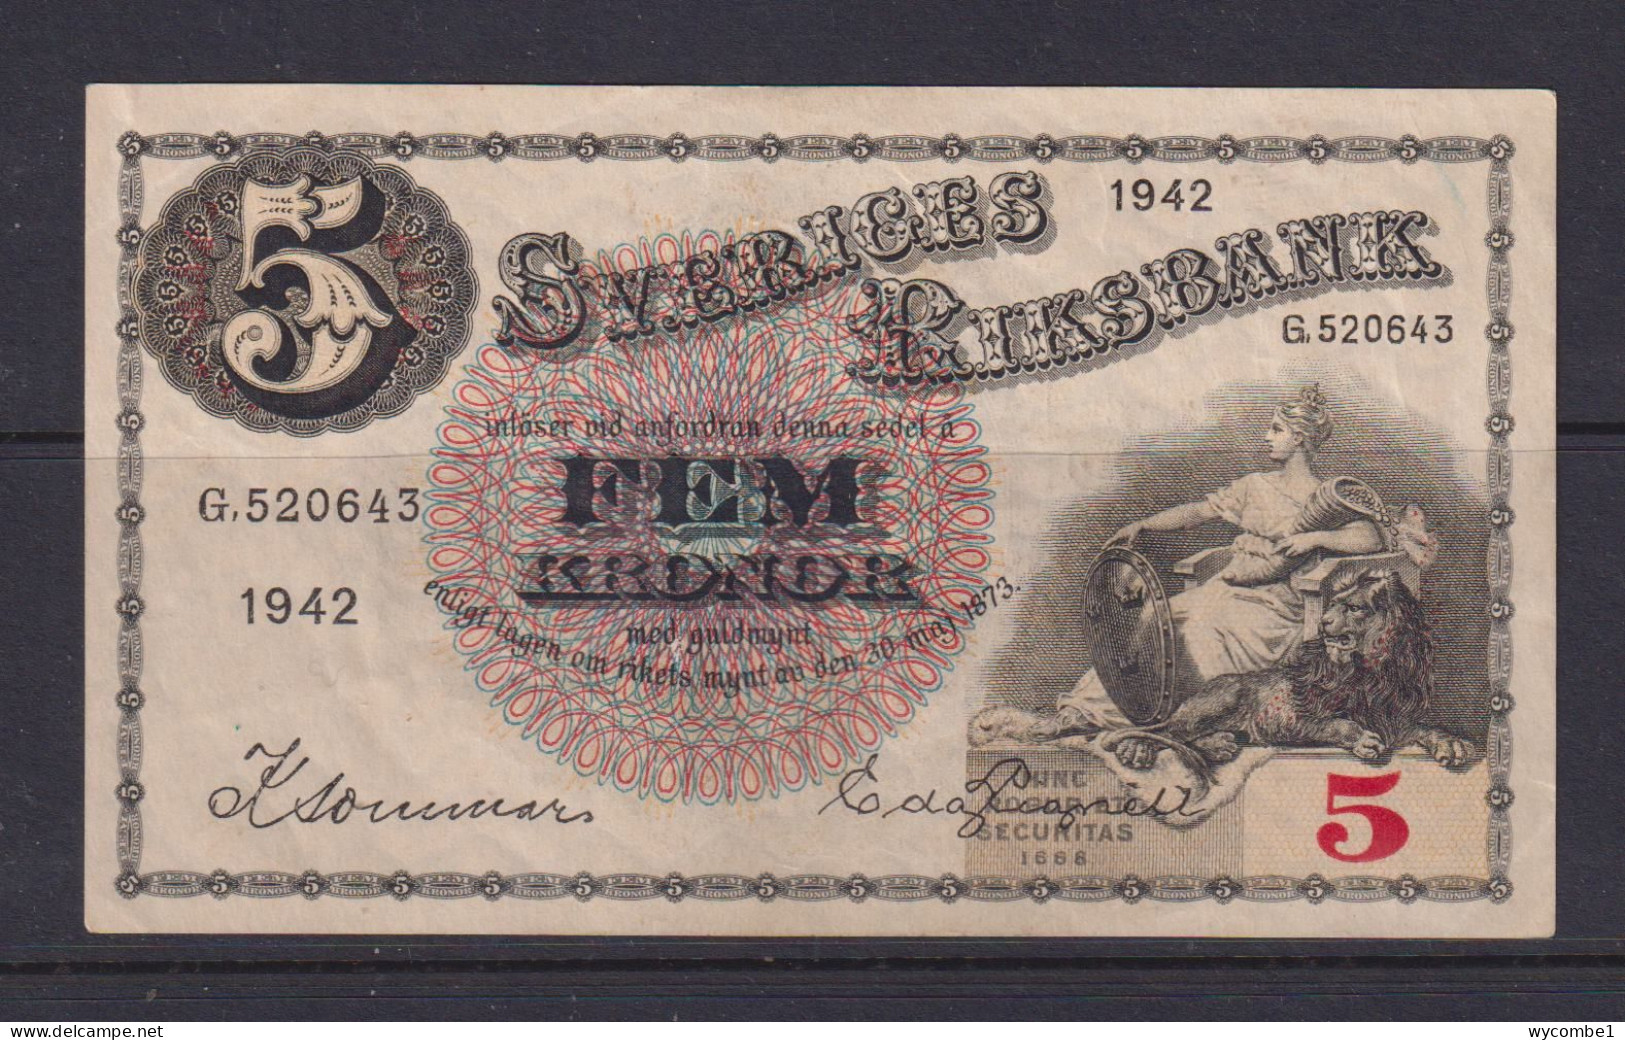 SWEDEN - 1942 5 Kronor Circulated Banknote As Scans - Sweden